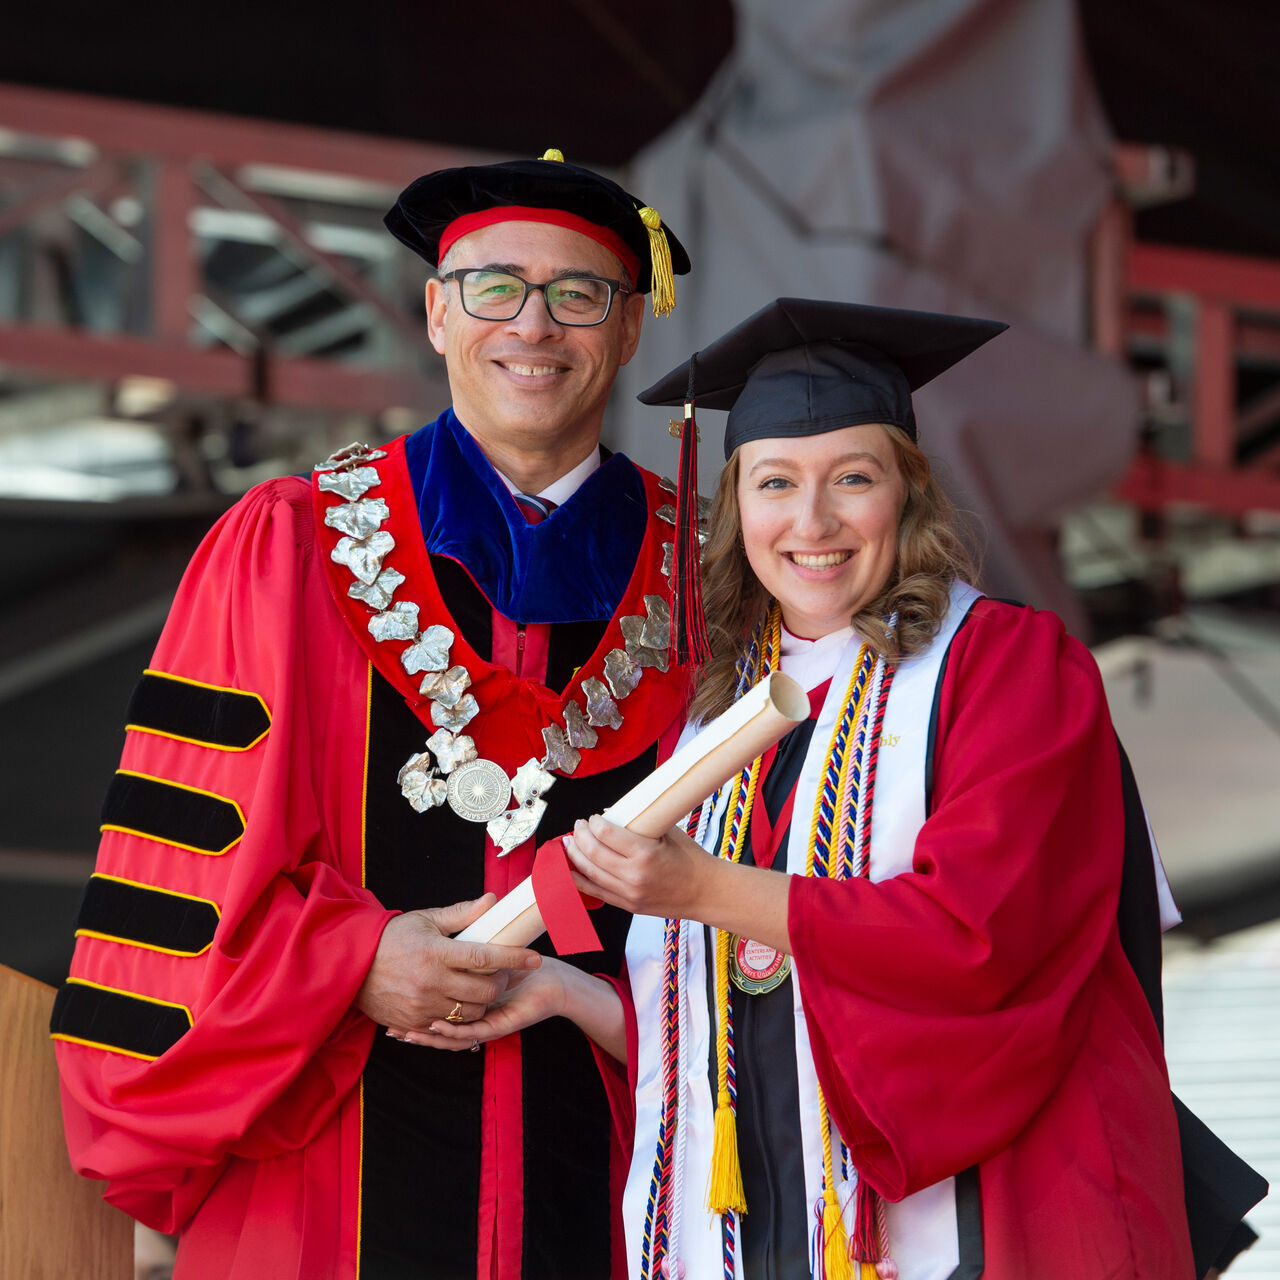 Rutgers President Jonathan Holloway and a student in graduation regalia at Commencement image number 0